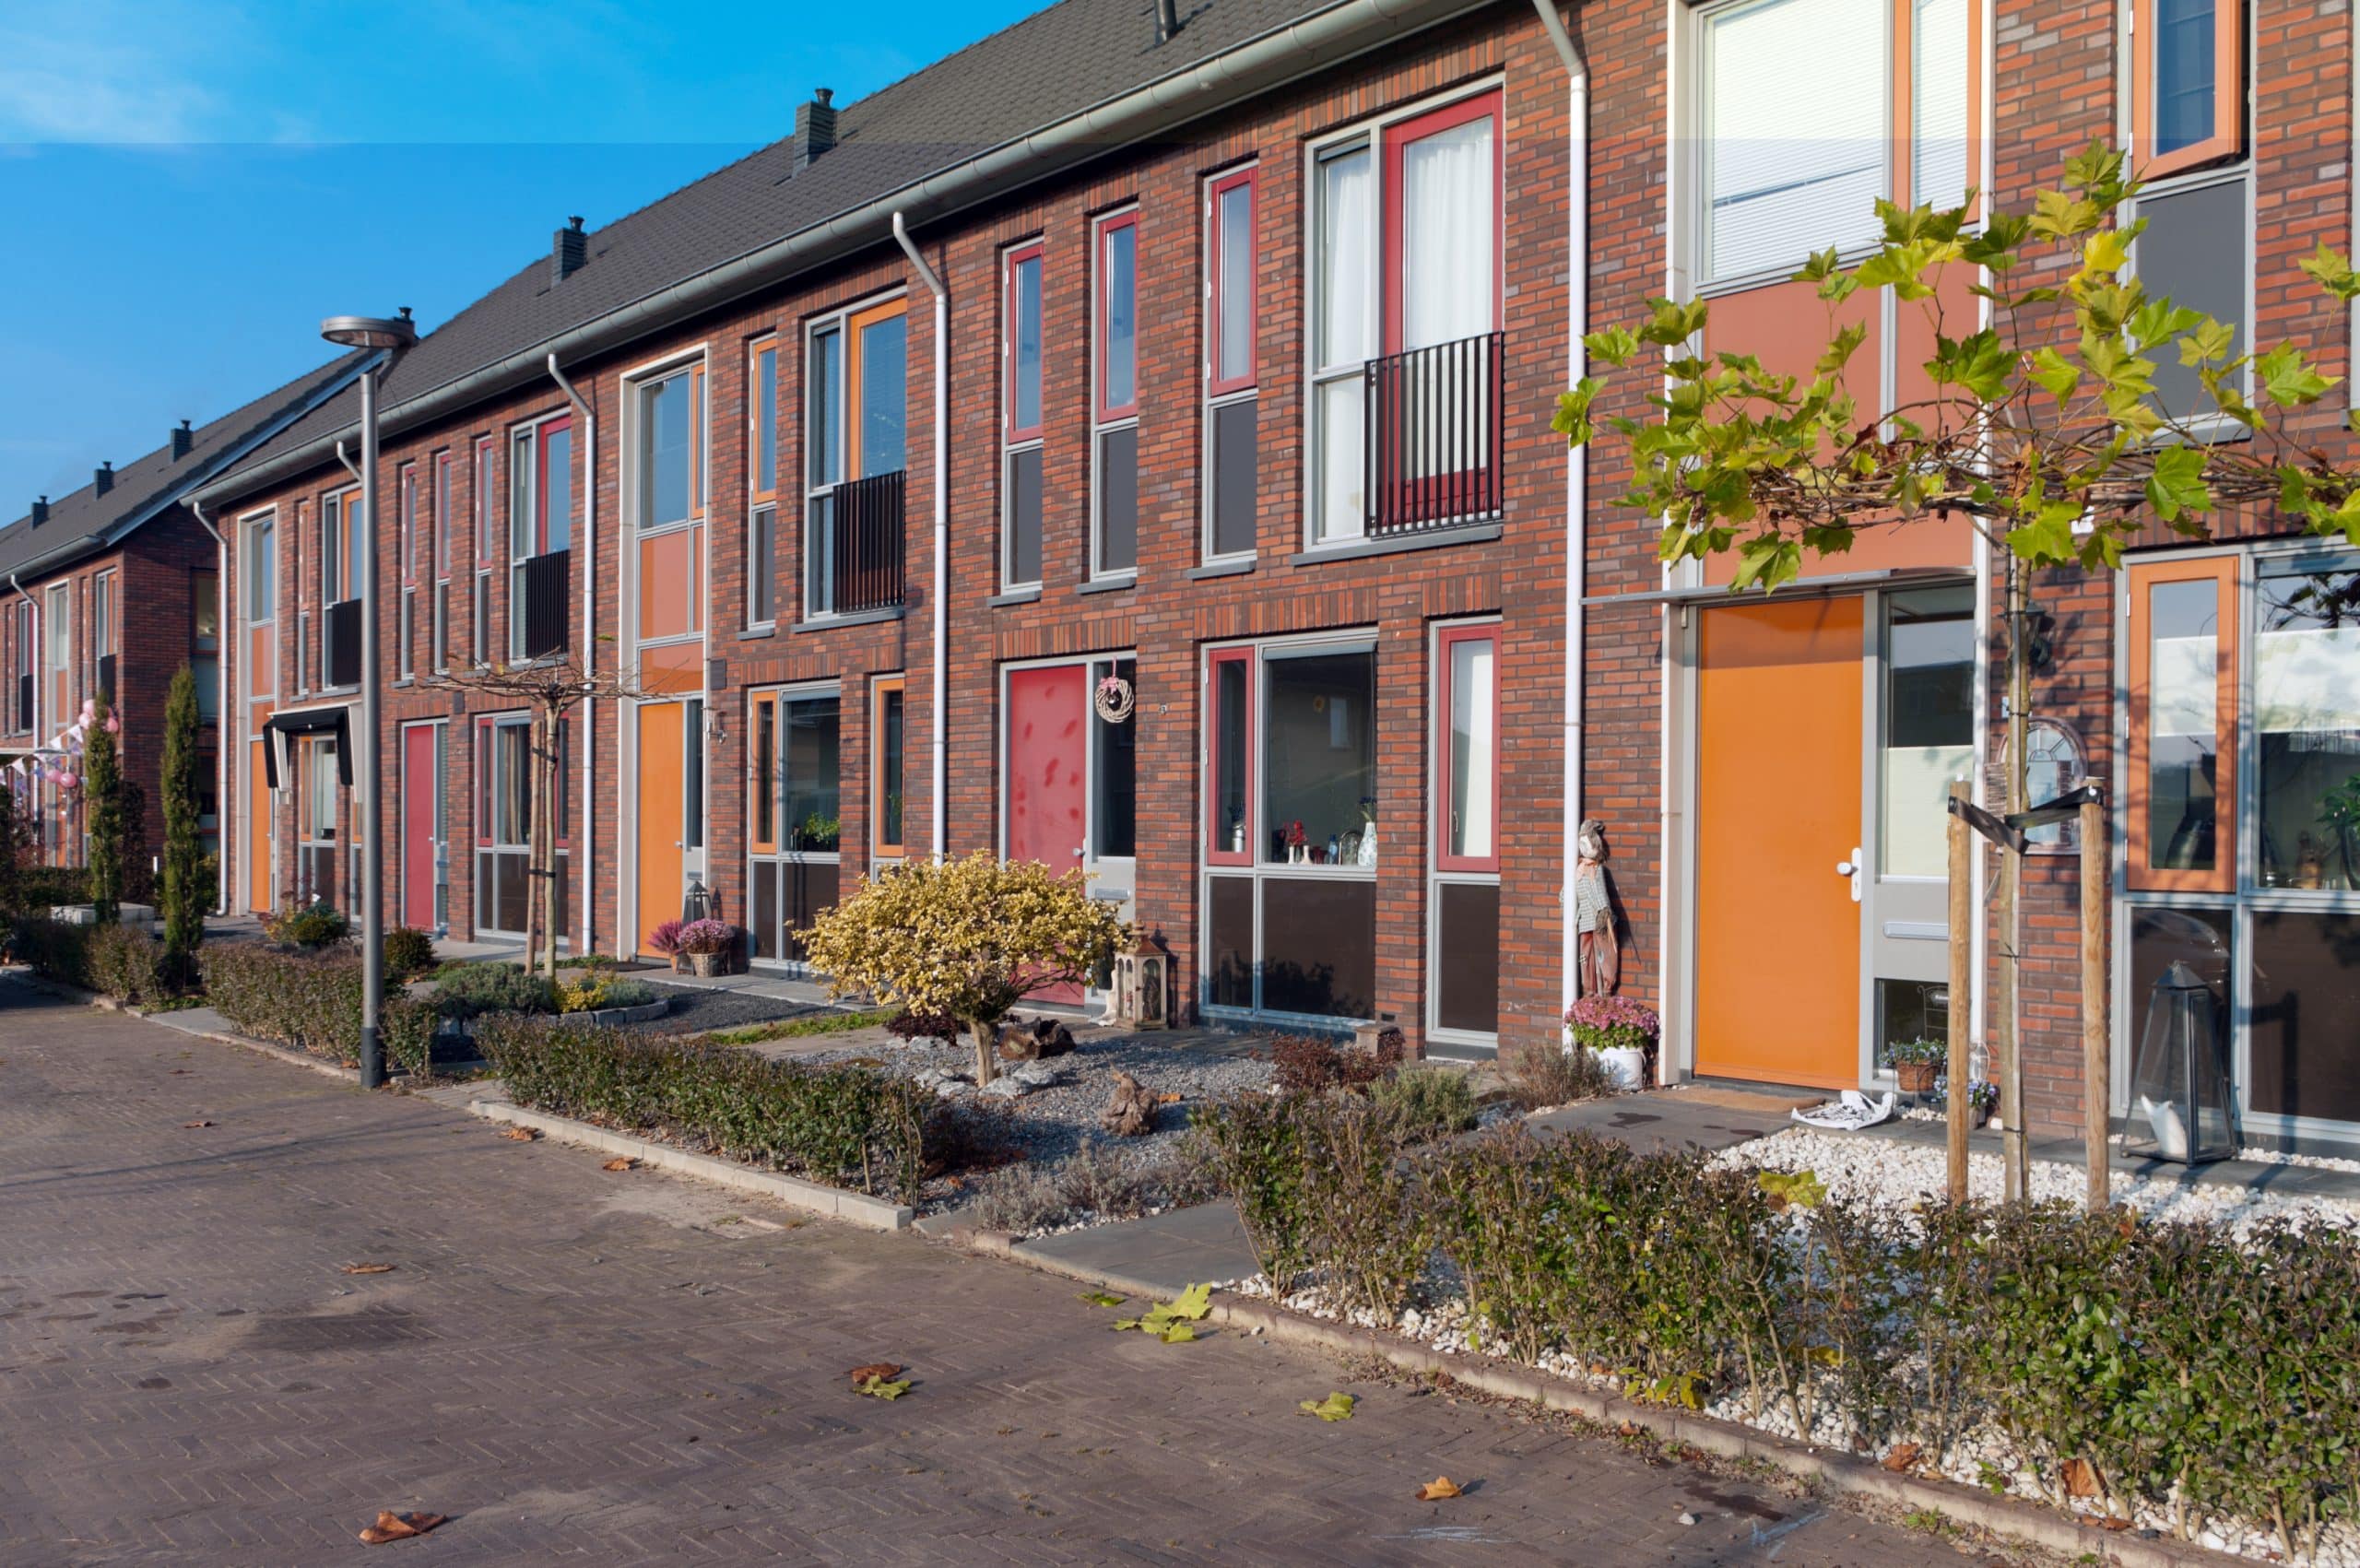 a row of new terraced houses in the Netherlands